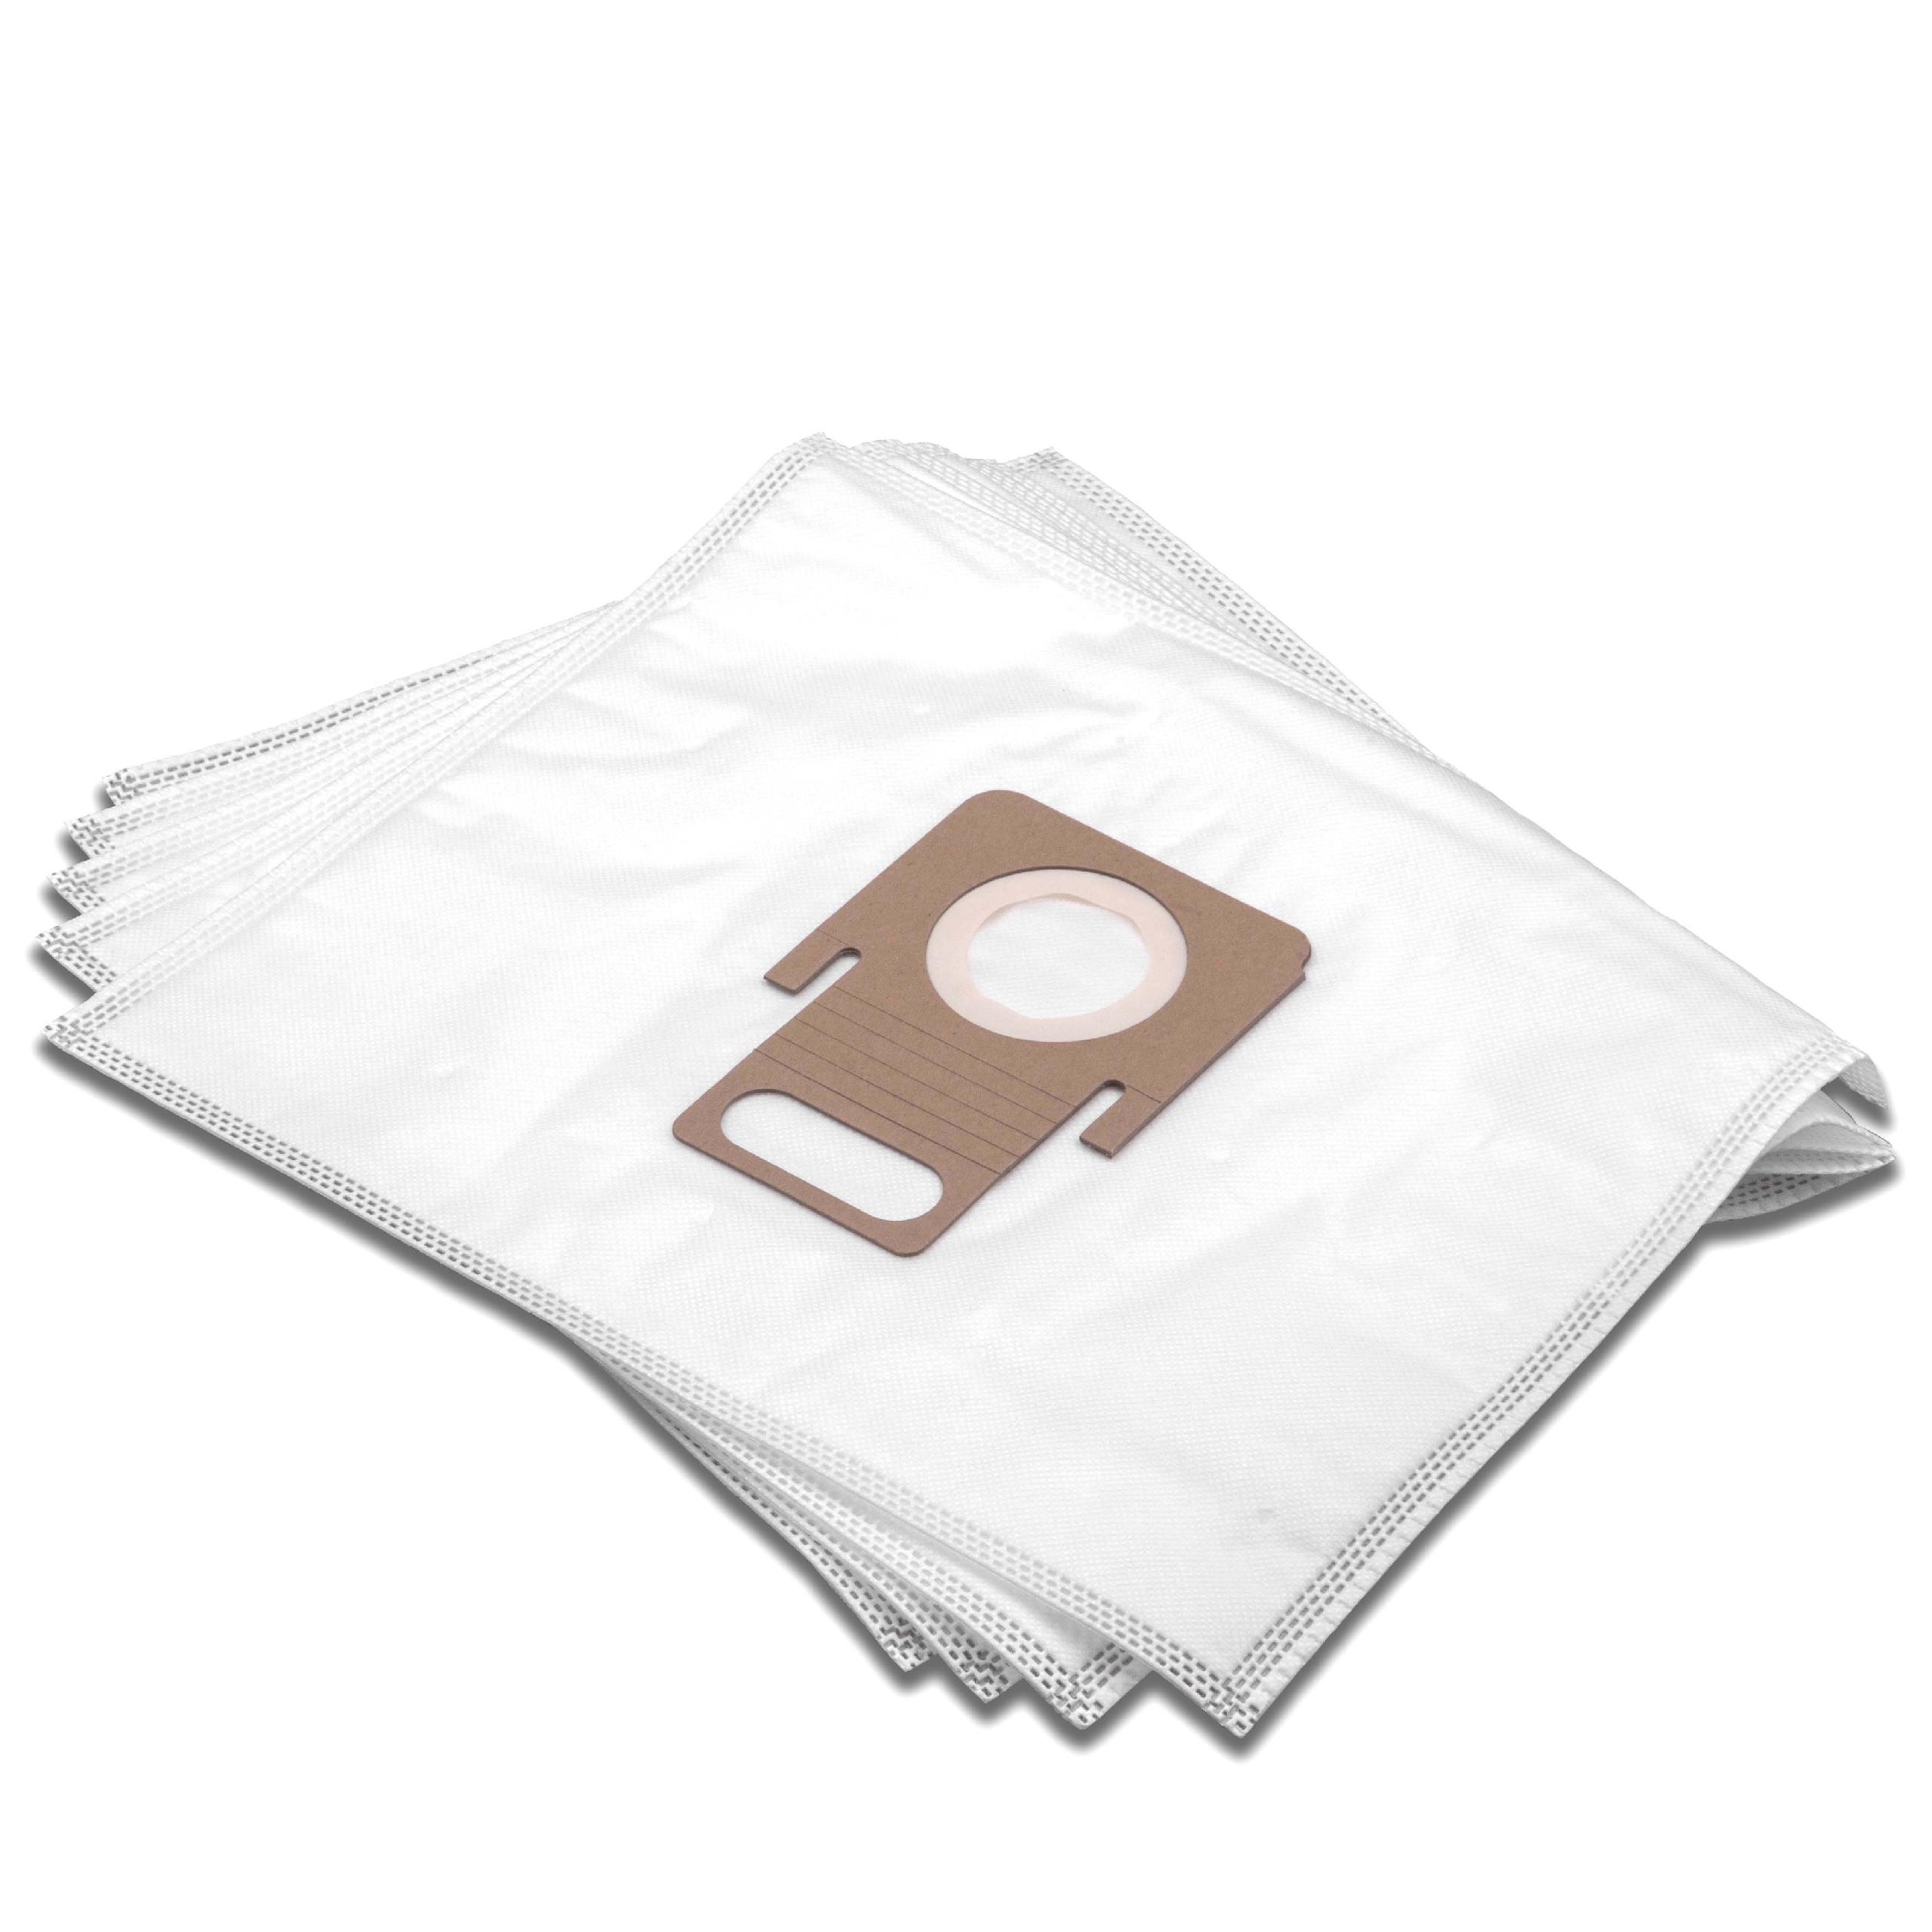 5x Vacuum Cleaner Bag replaces Thomas 787246 for Thomas - microfleece